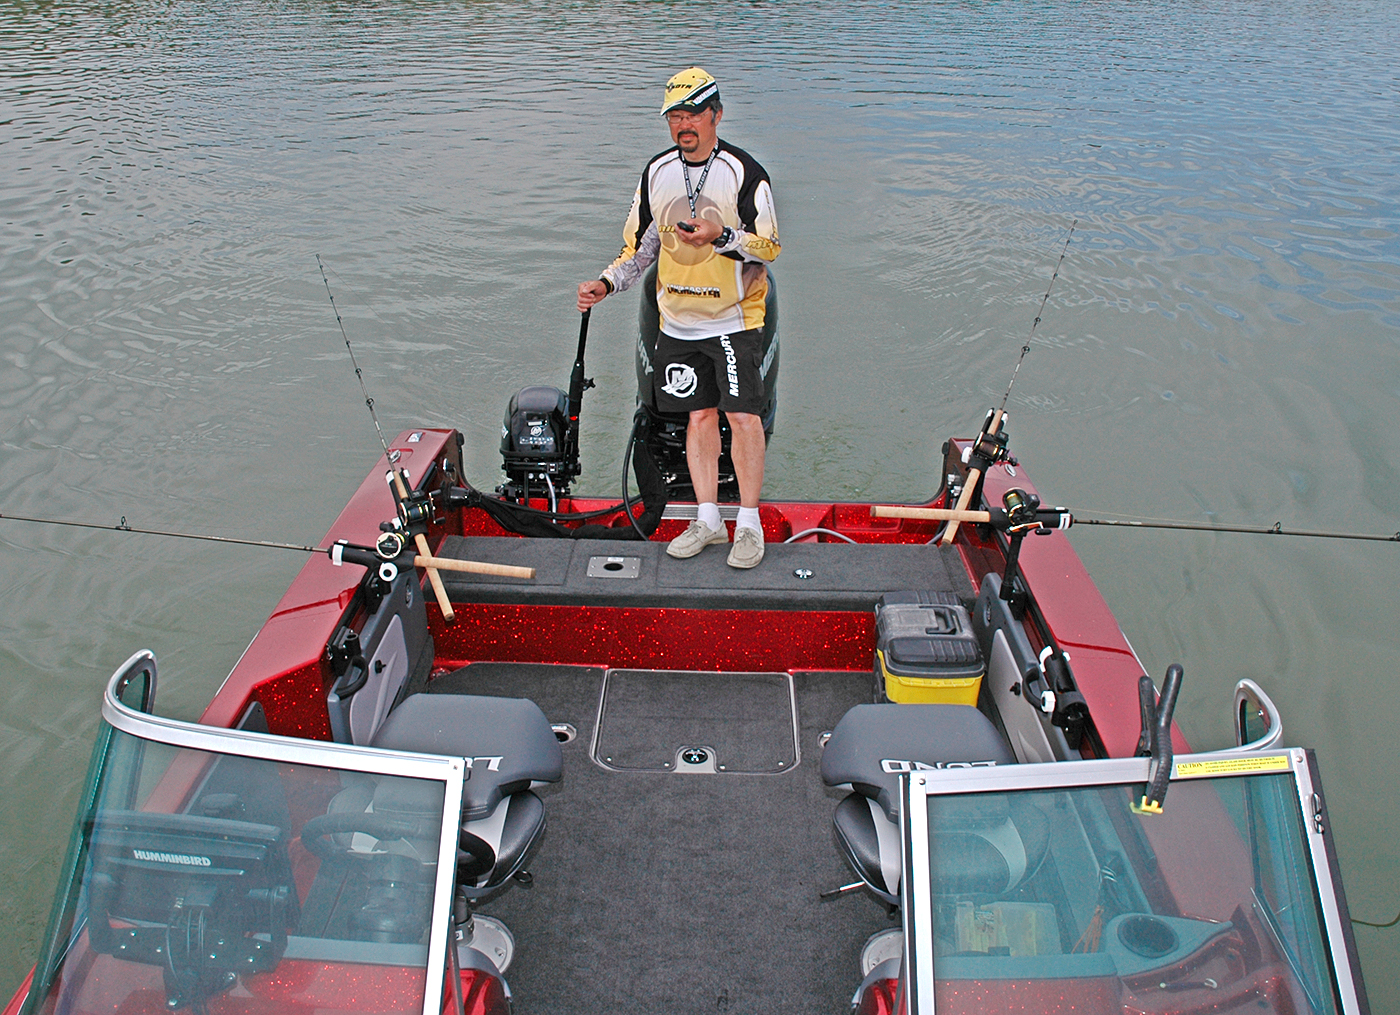 Accessorizing Your Boat | OutdoorHub